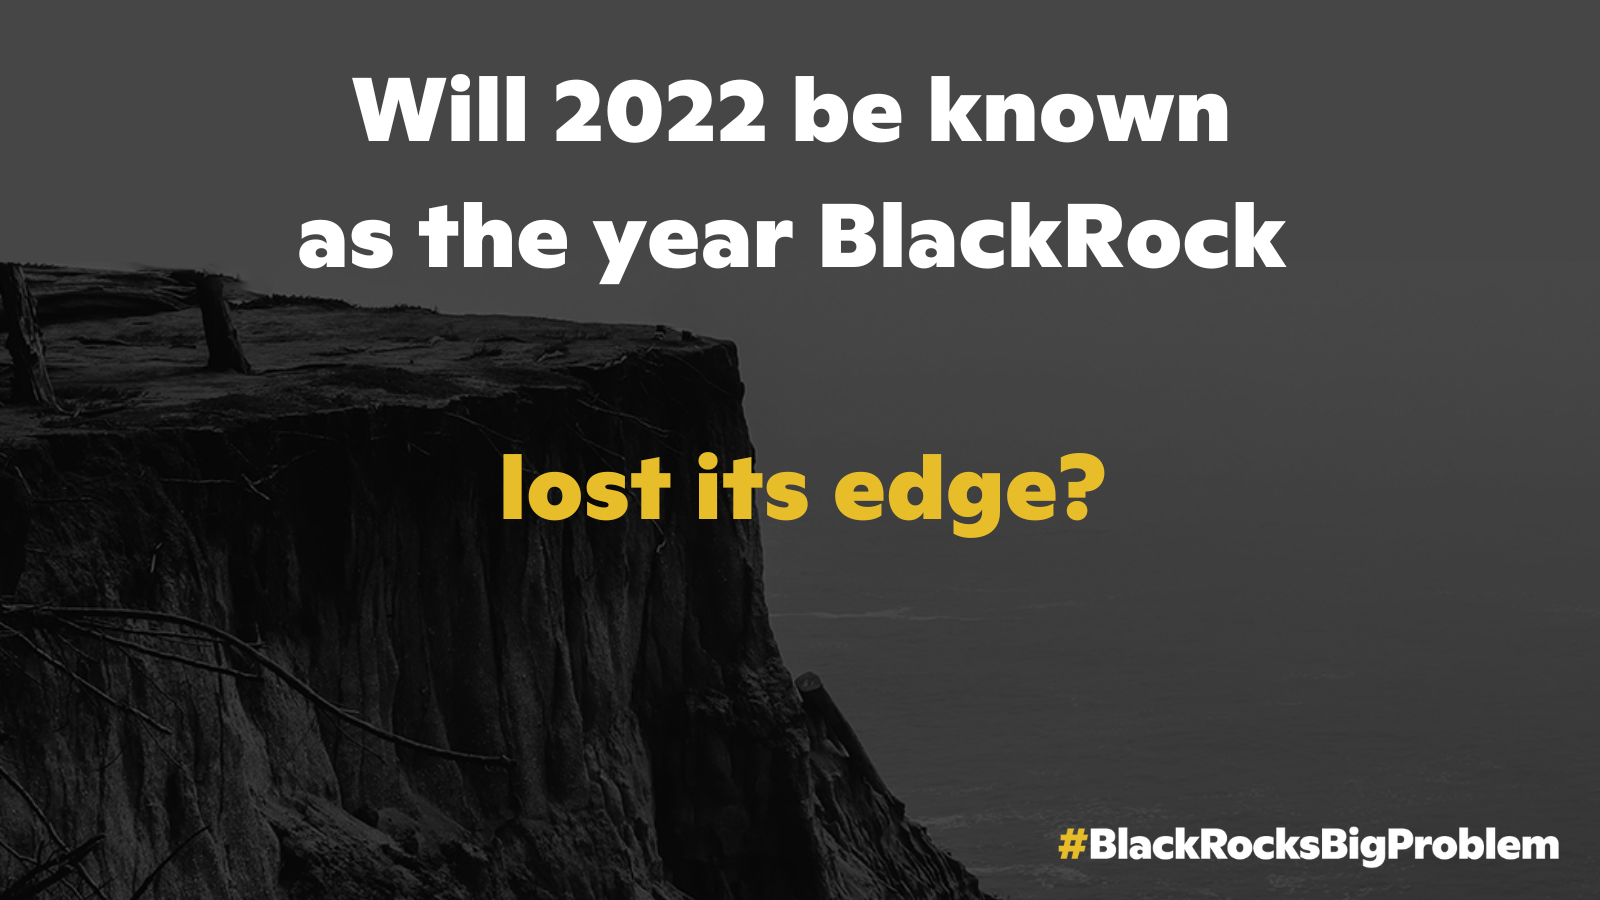 Black and white photo of a cliff overlooking an ocean. white and yellow text overlaid reads "will 2022 be known as the year BlackRock lost its edge" the BlackRock's Big Problem campaign wordmark is in the bottom right corner